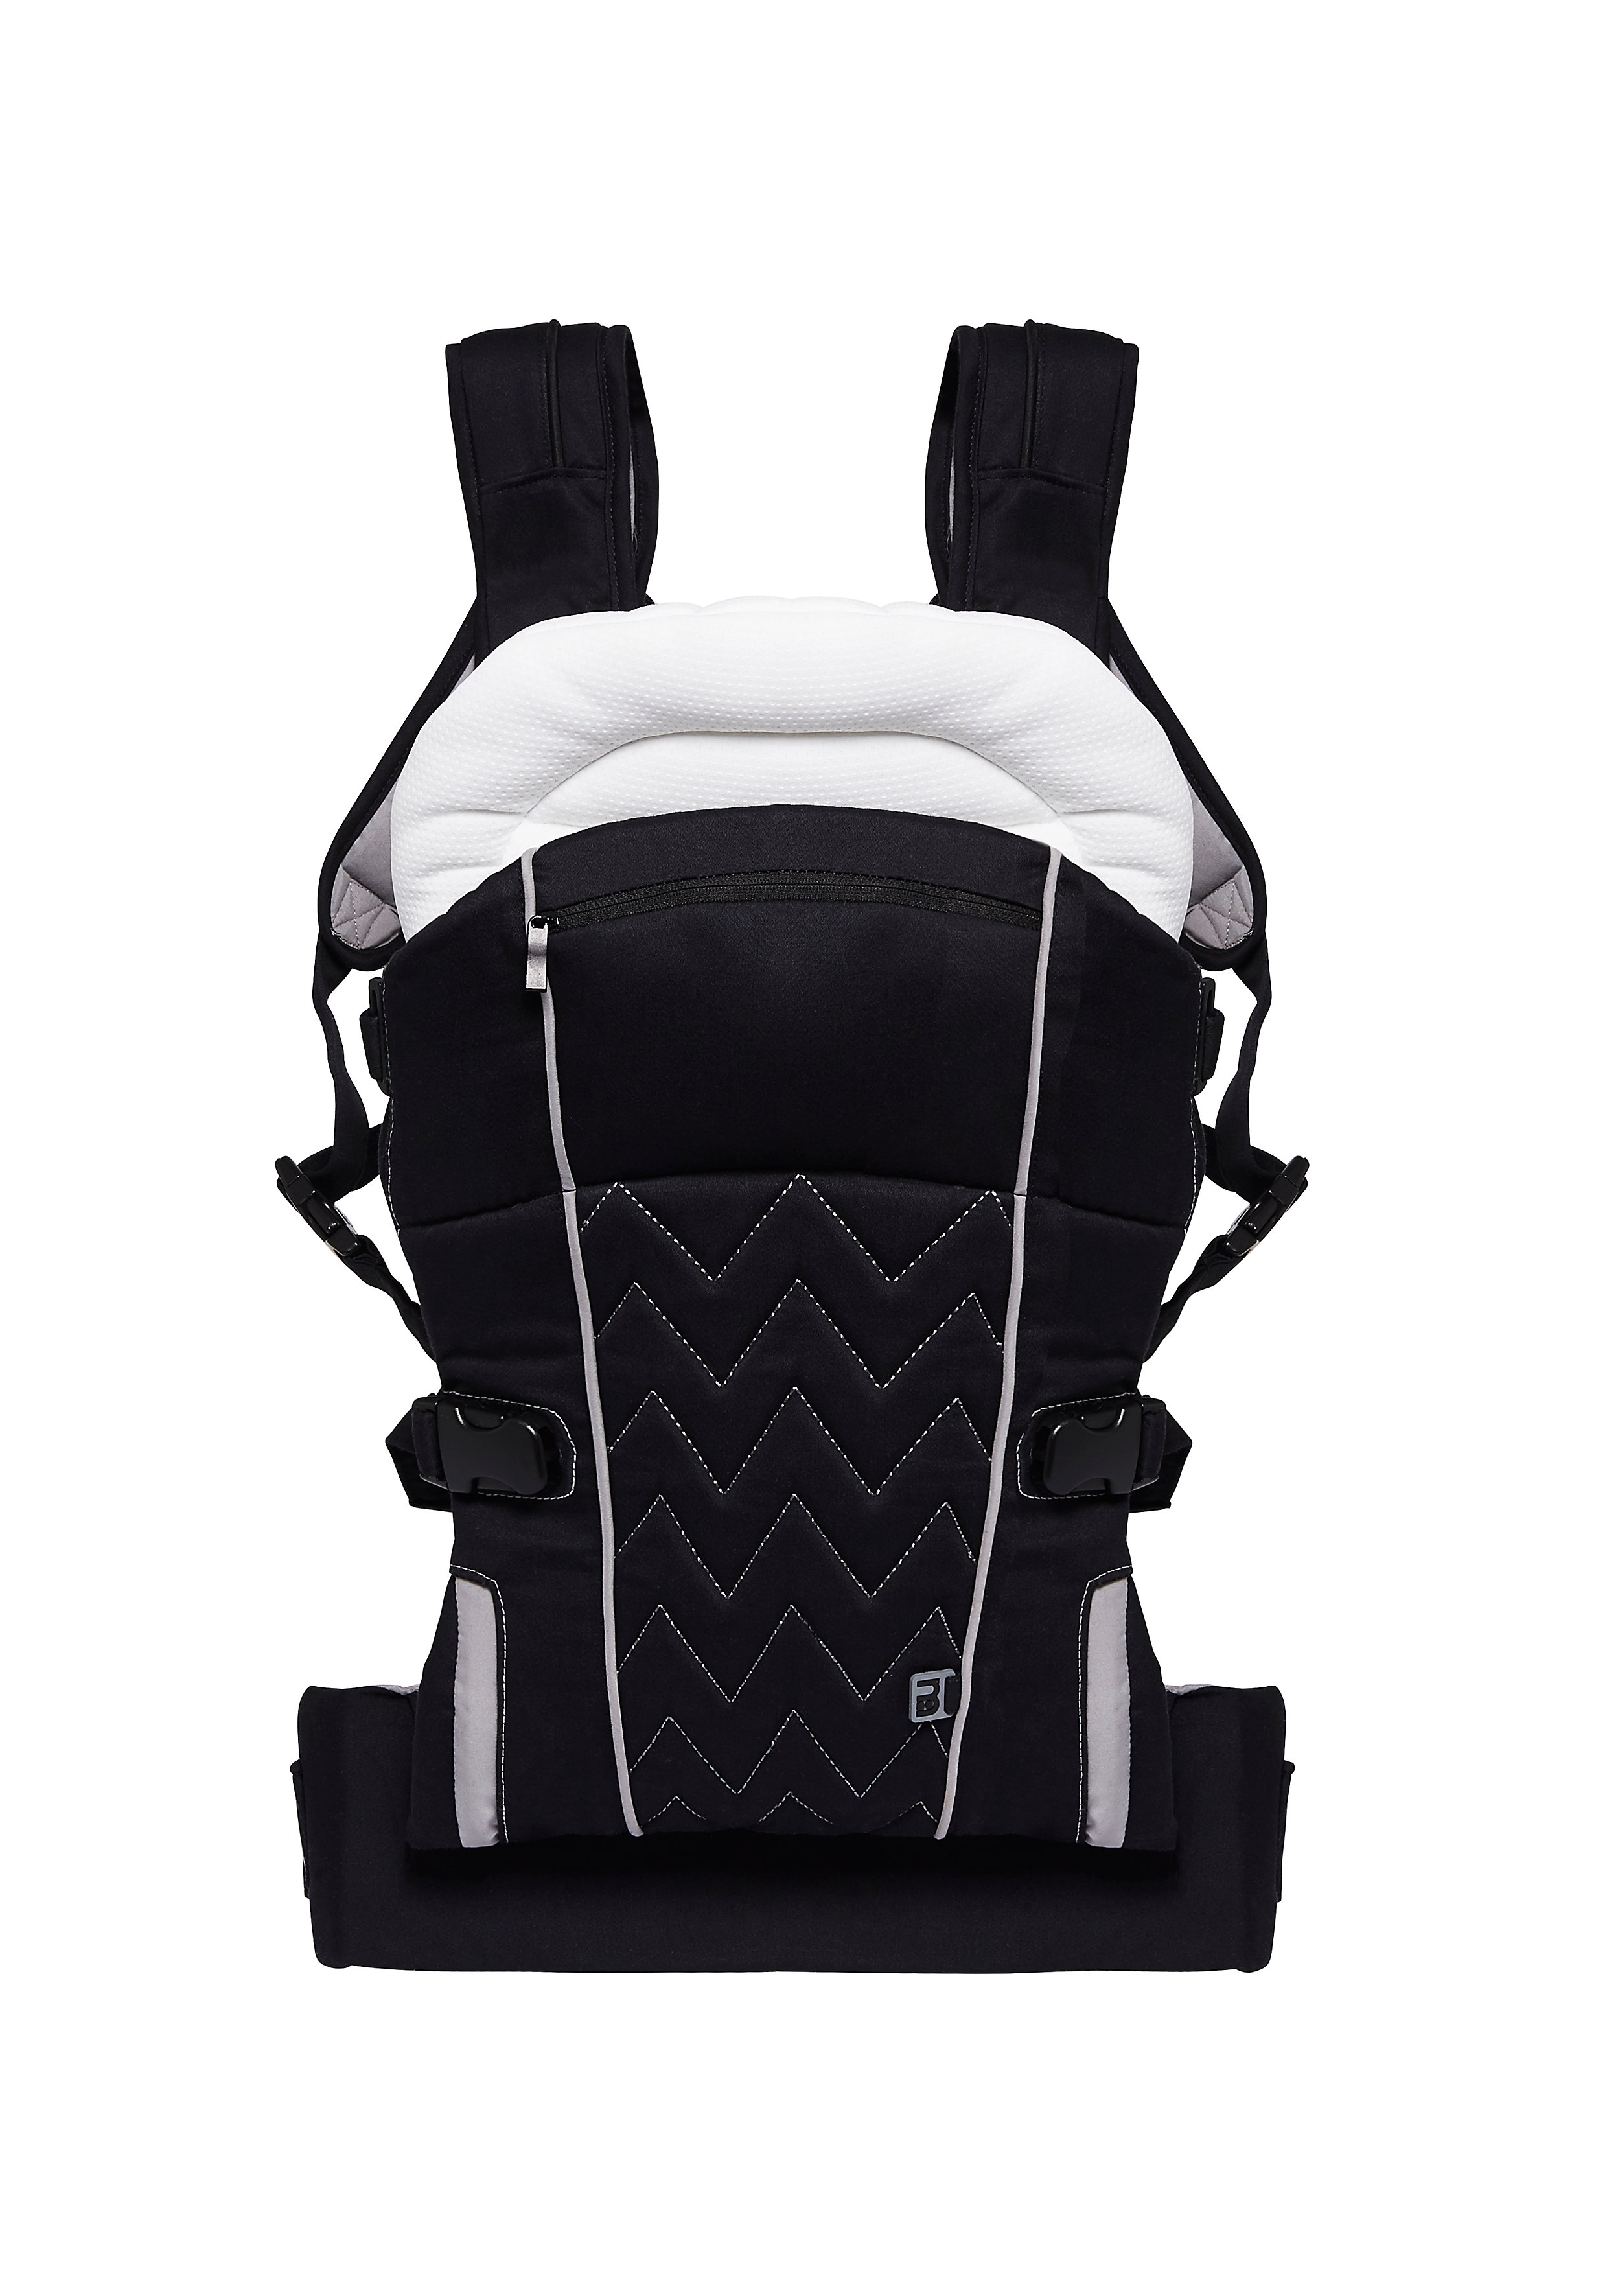 Mothercare Carr 4 Position Baby Carrier Black